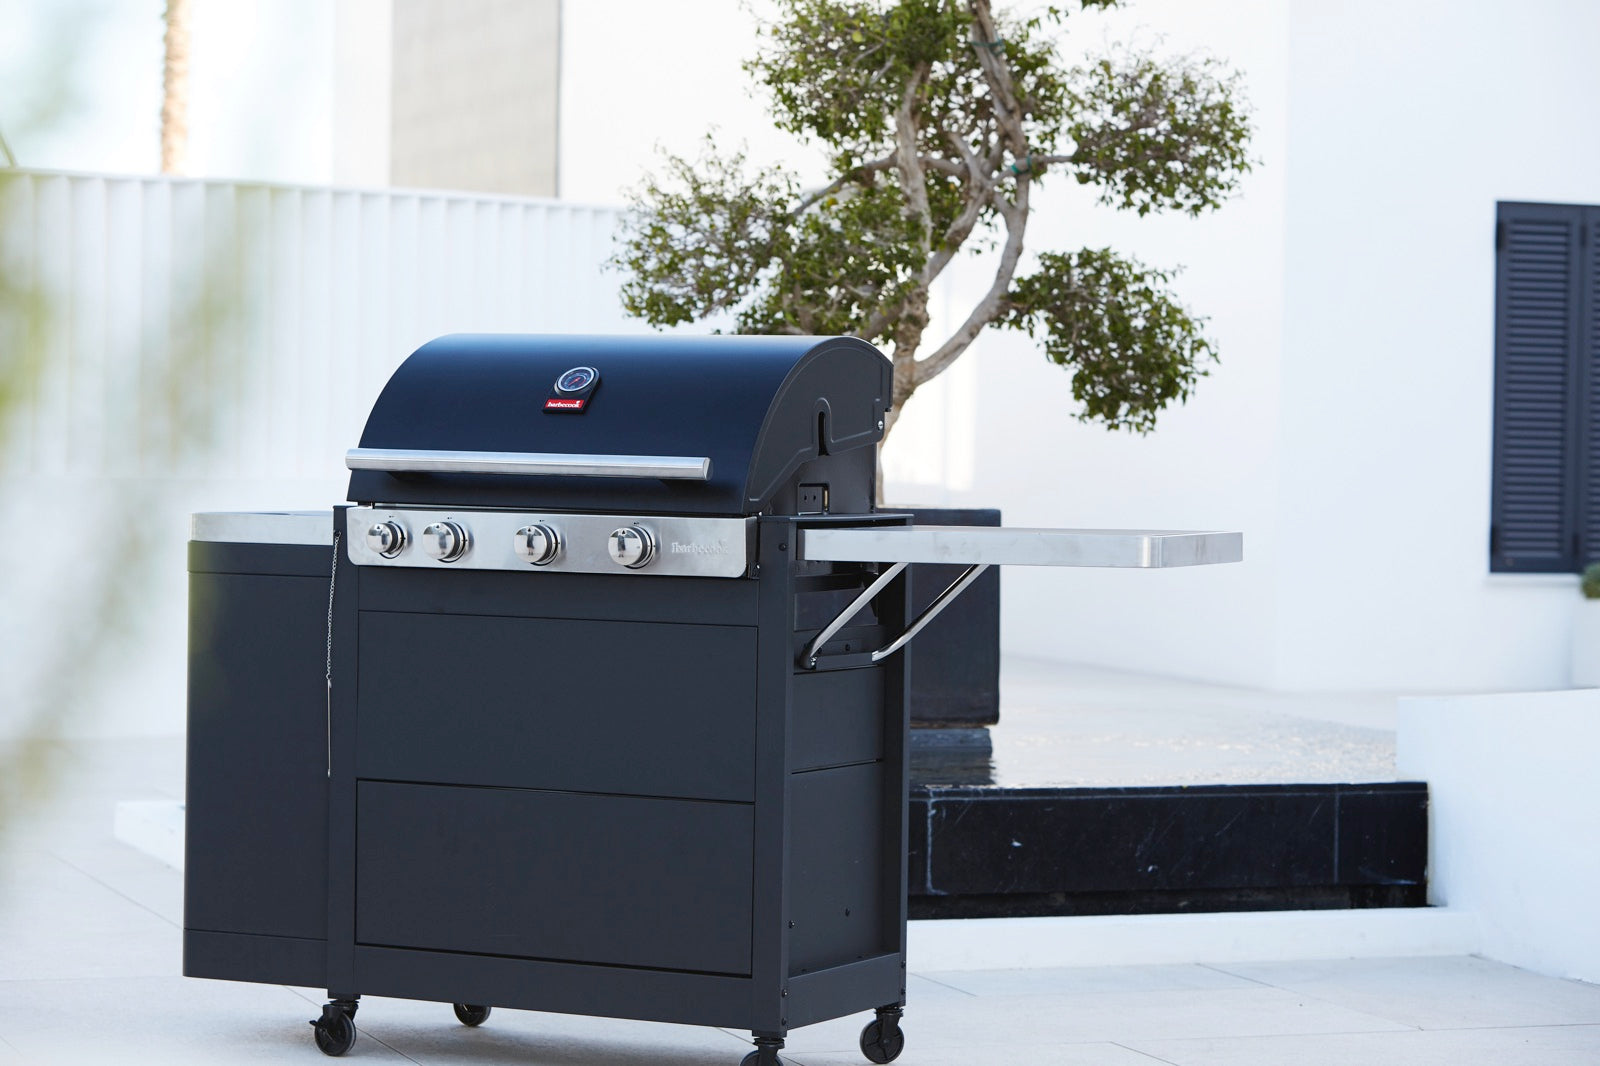 How to maintain your gas barbecue?